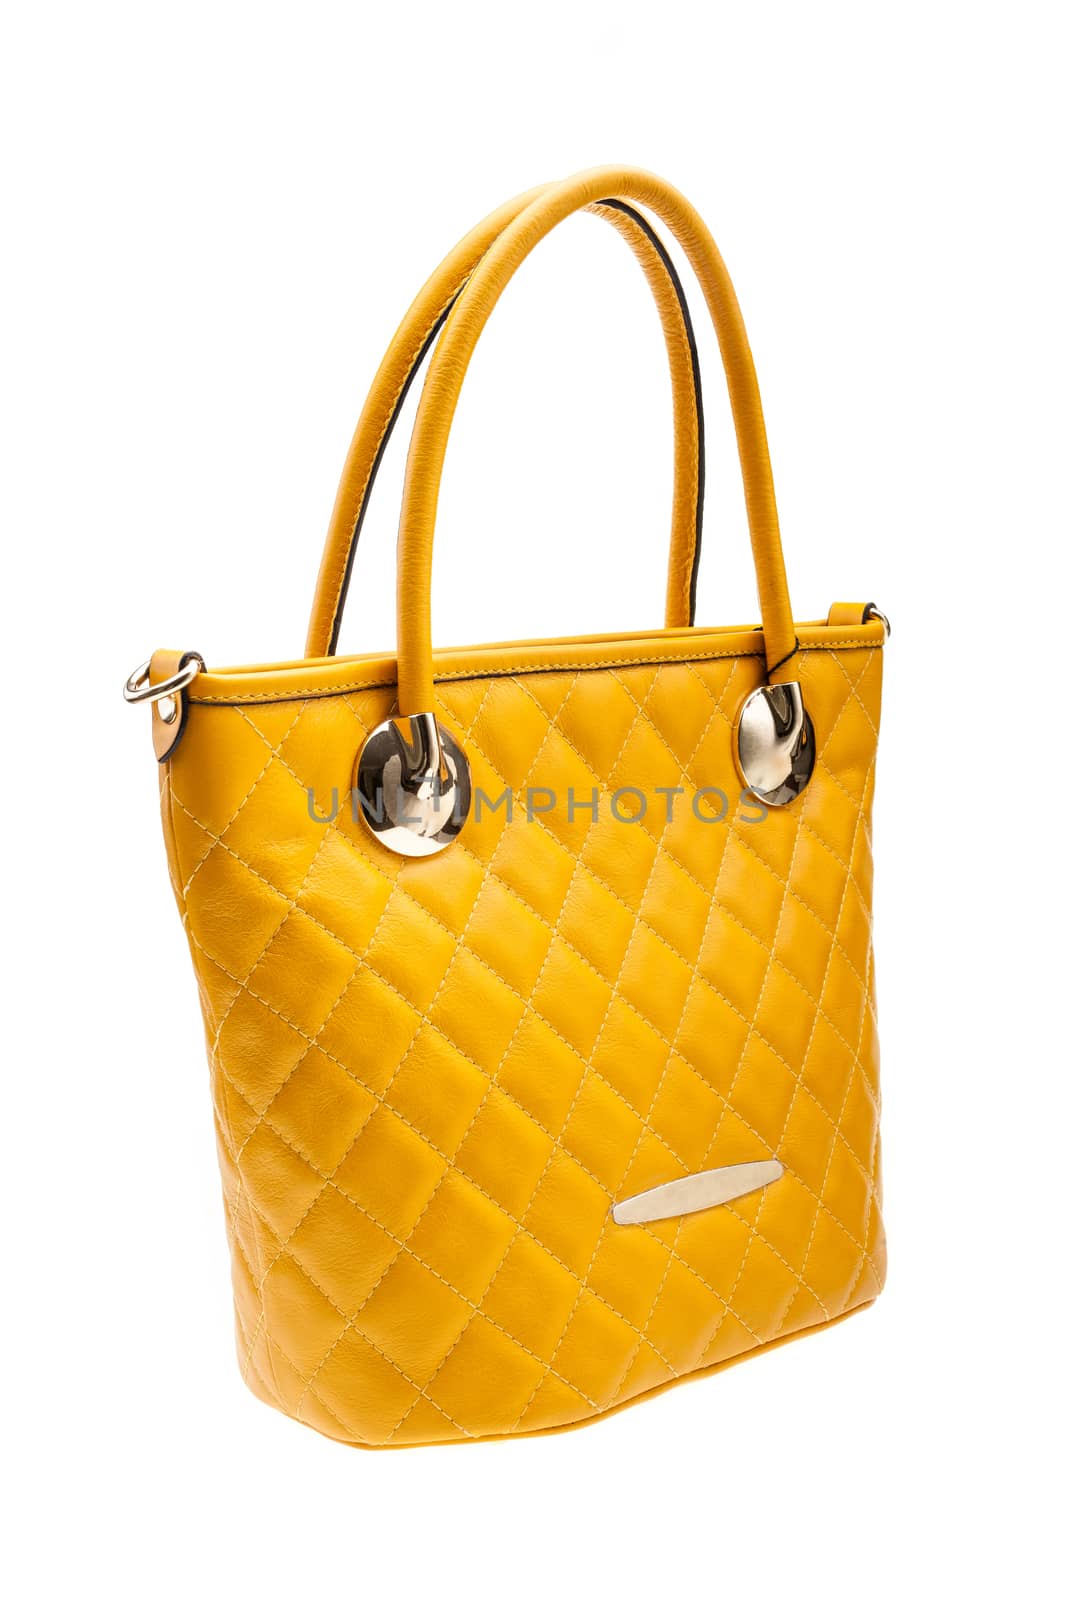 Yellow womens bag isolated on white background. by igor_stramyk